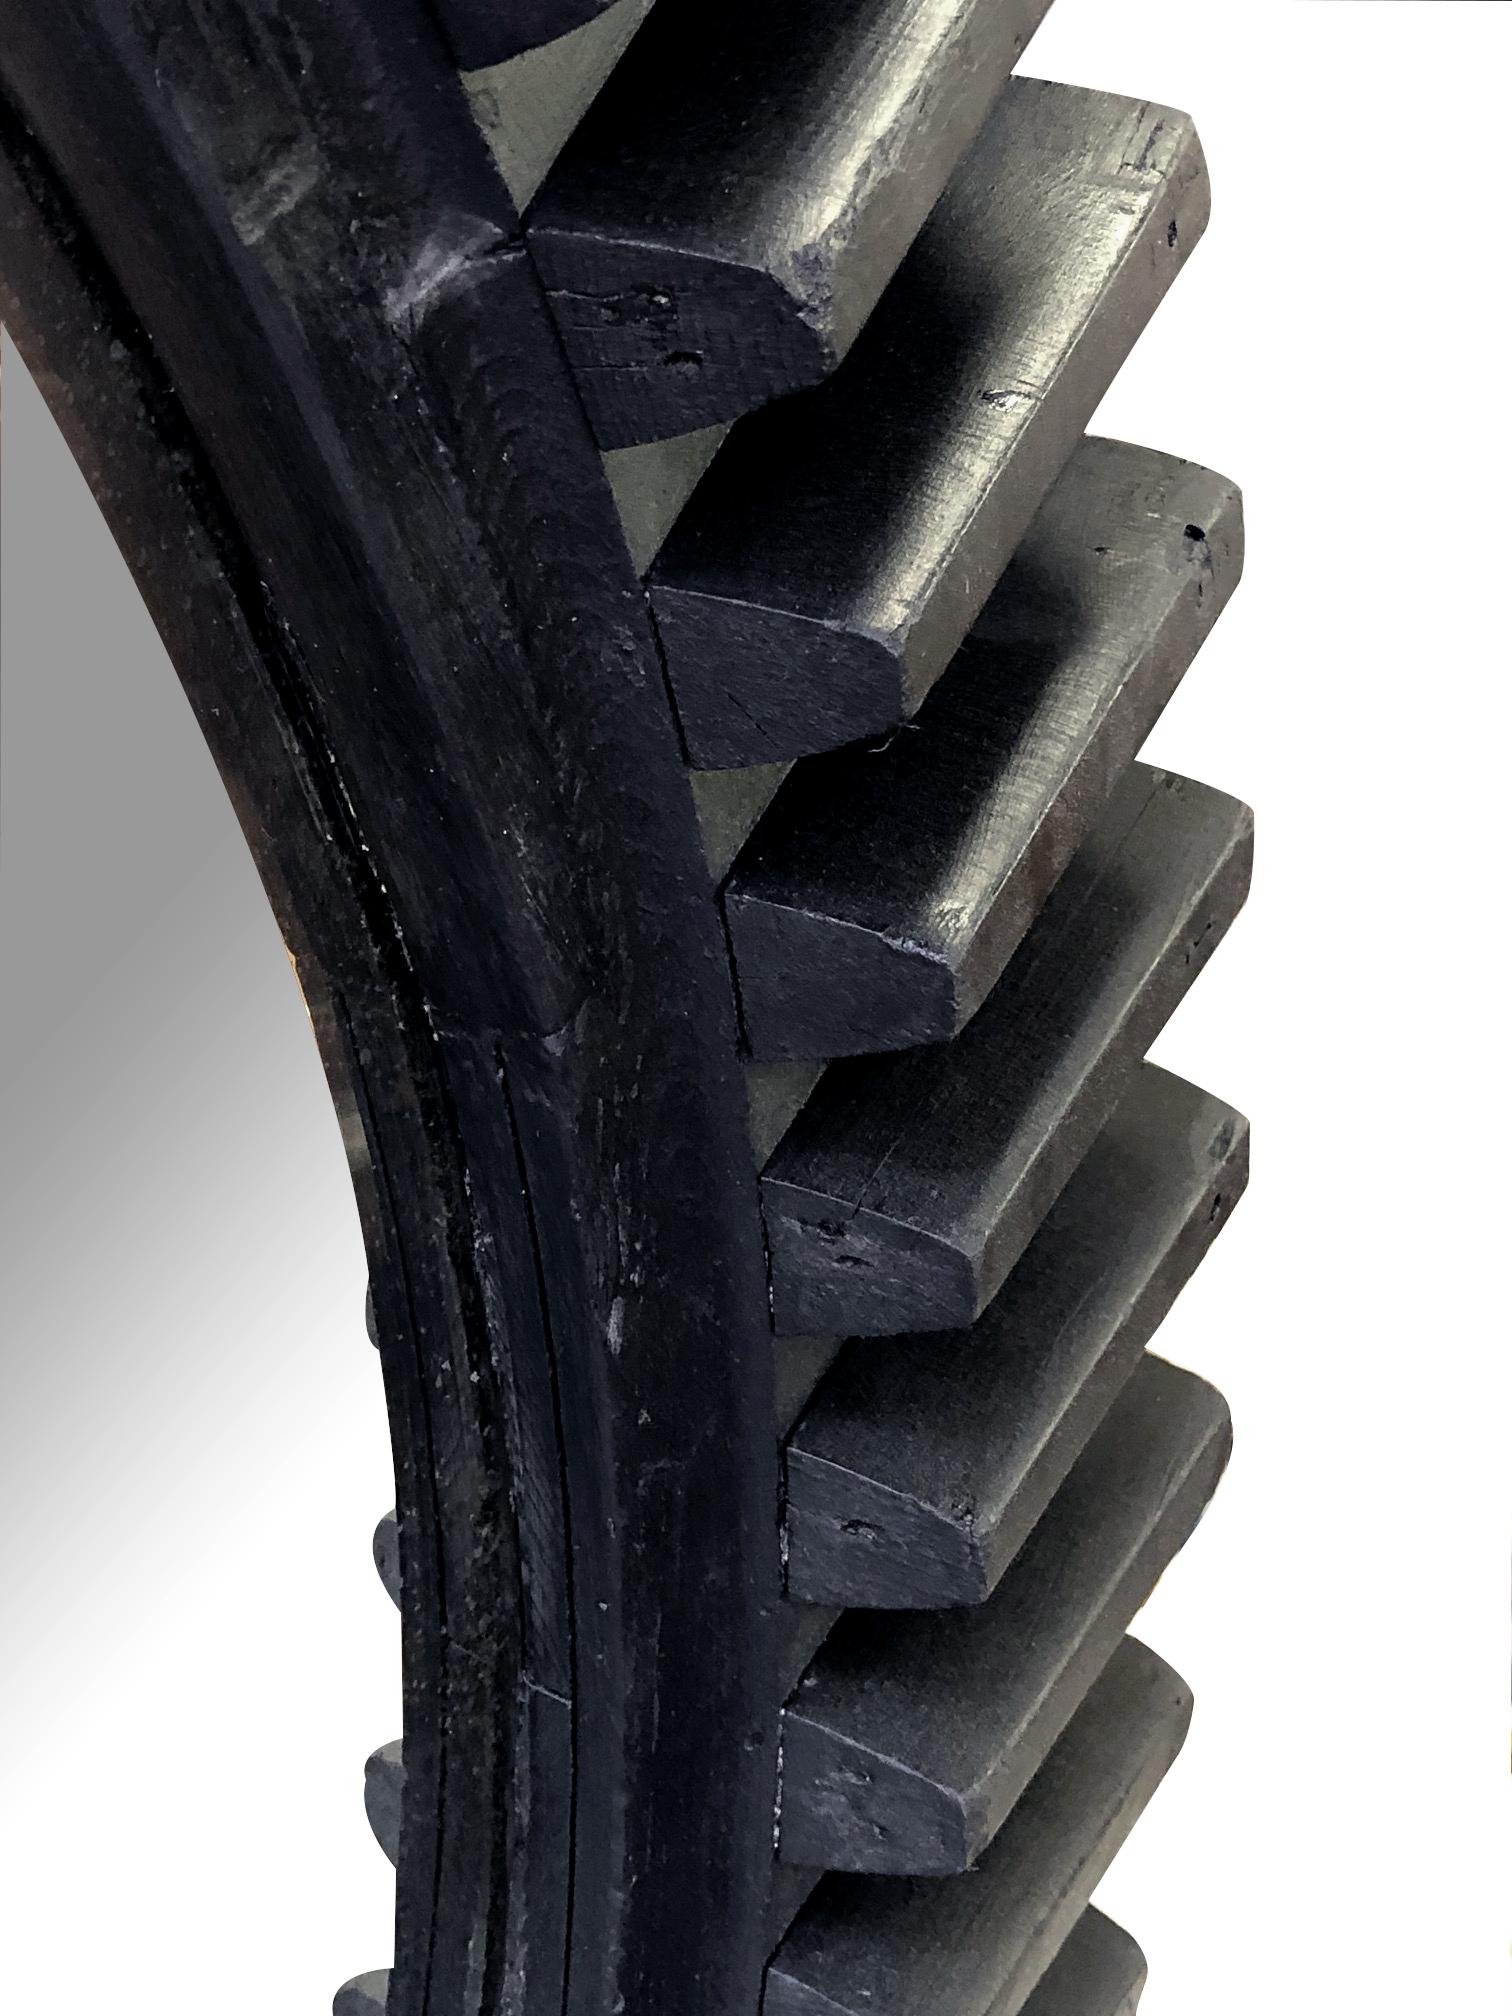 the thick ebonized gear wheel with cut teeth meant to mesh with another toothed wheel; fitted with a later mirror plate.